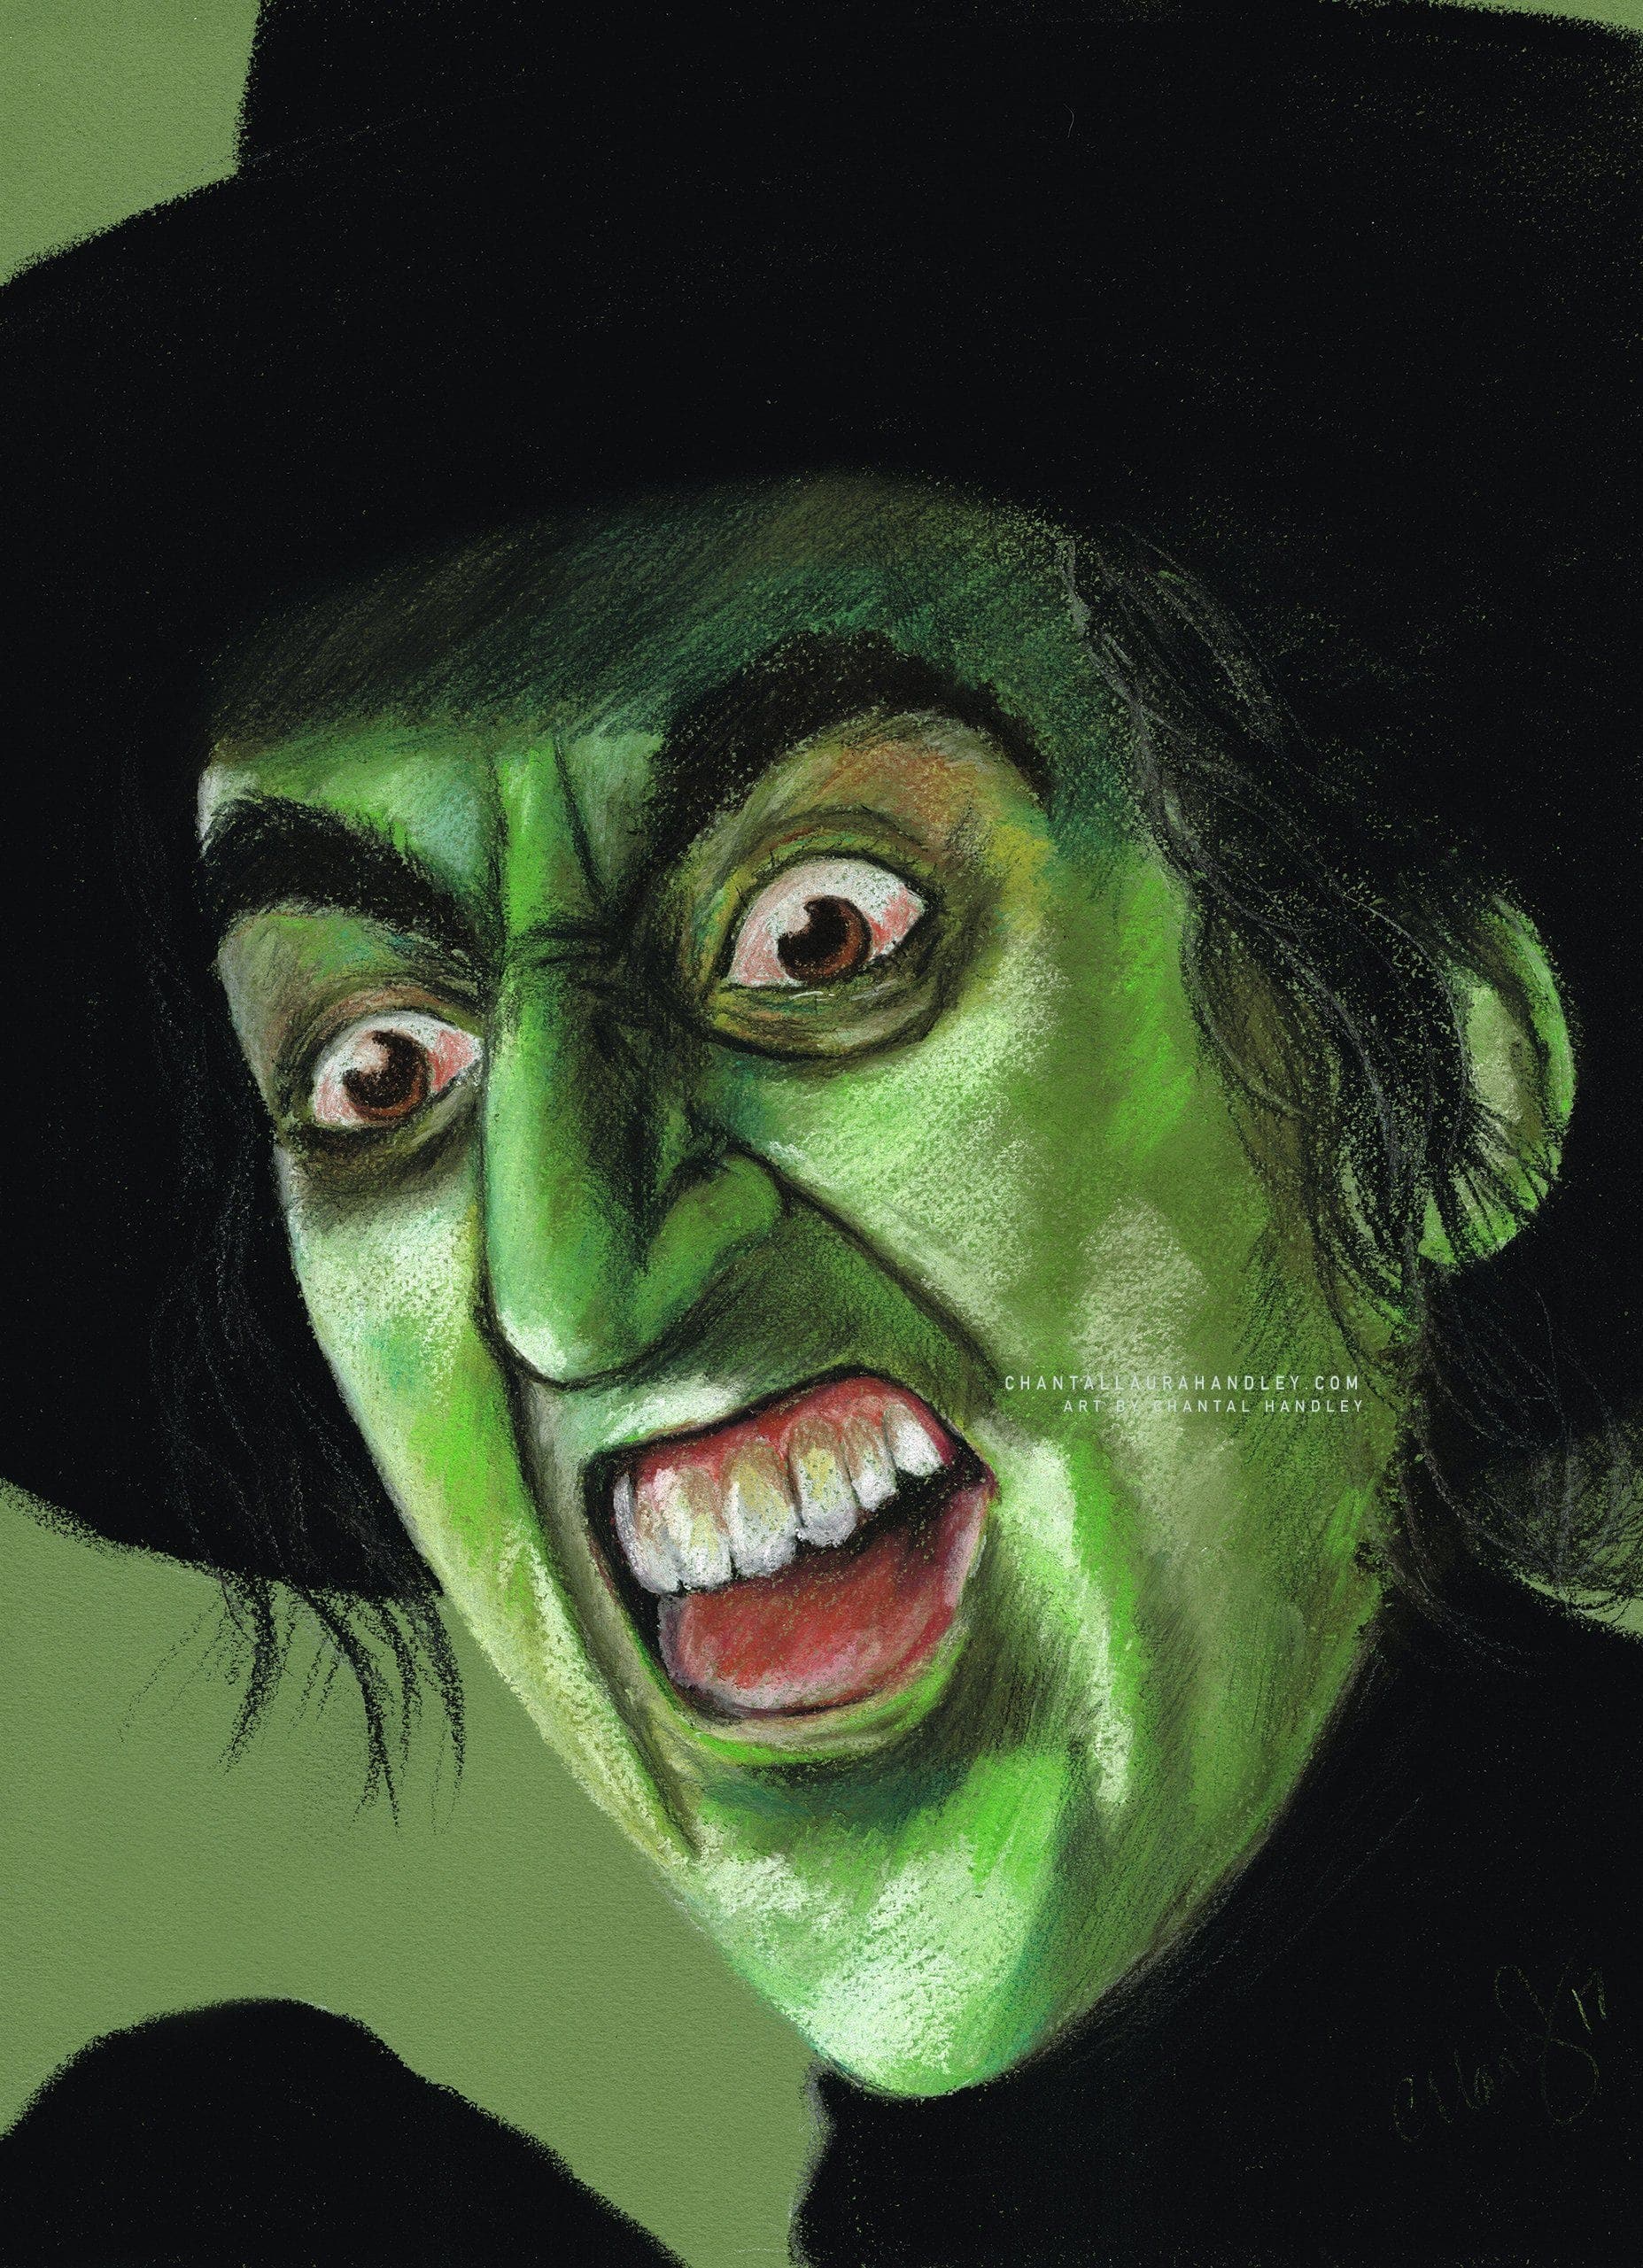 WIZARD OF OZ - The Wicked Witch of the West - Art Print ChantalLauraHandley